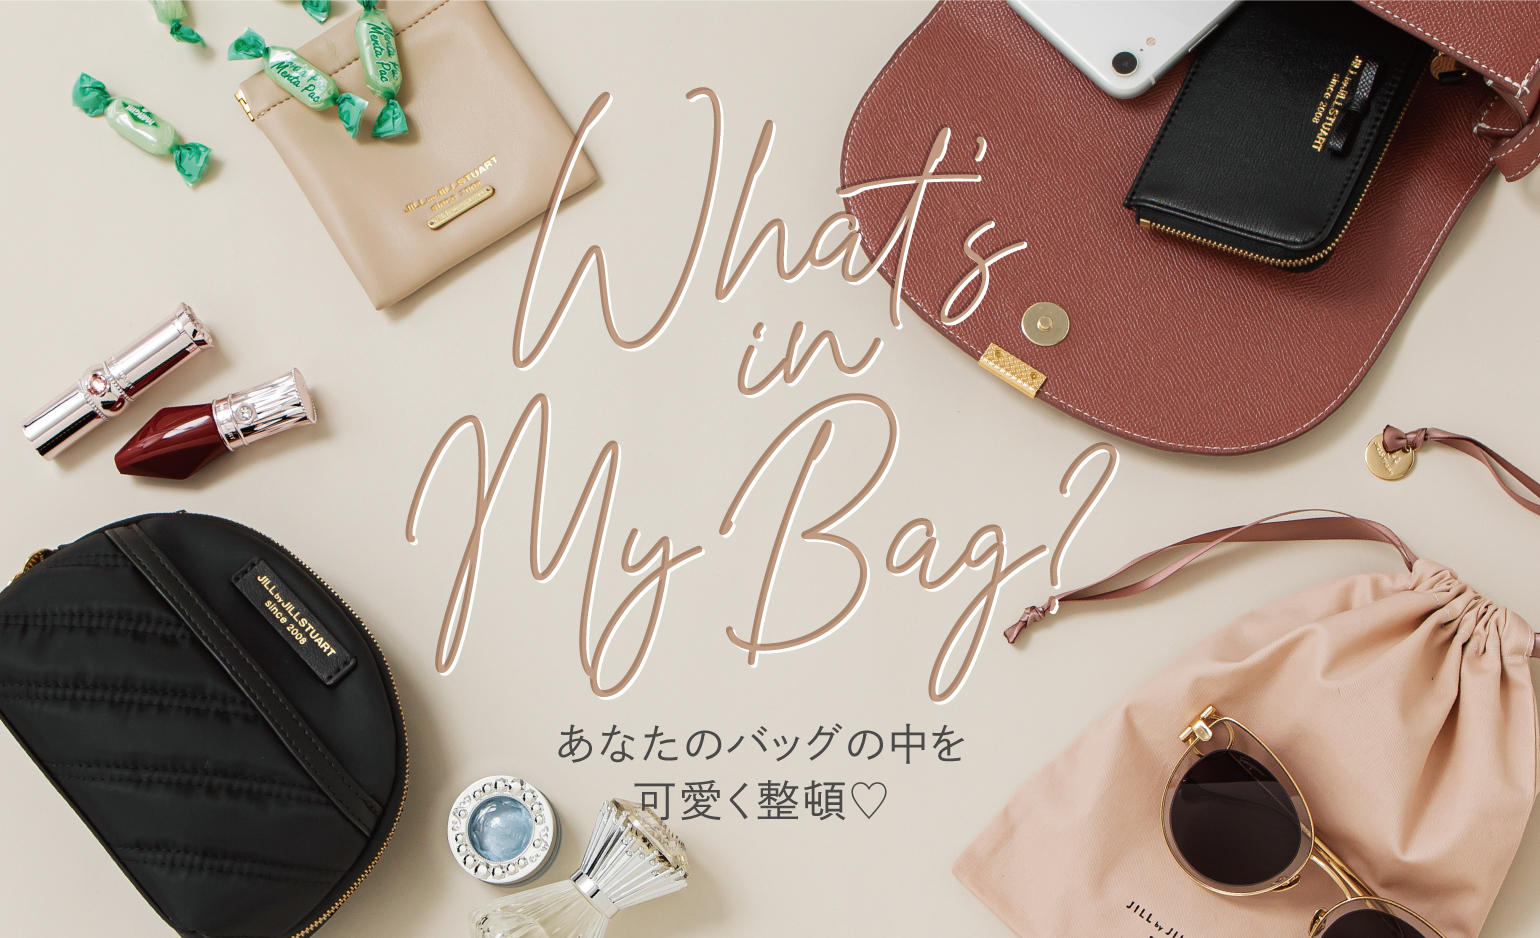 What's In My Bag | [ジルバイジルスチュアート] | サンエービーディー